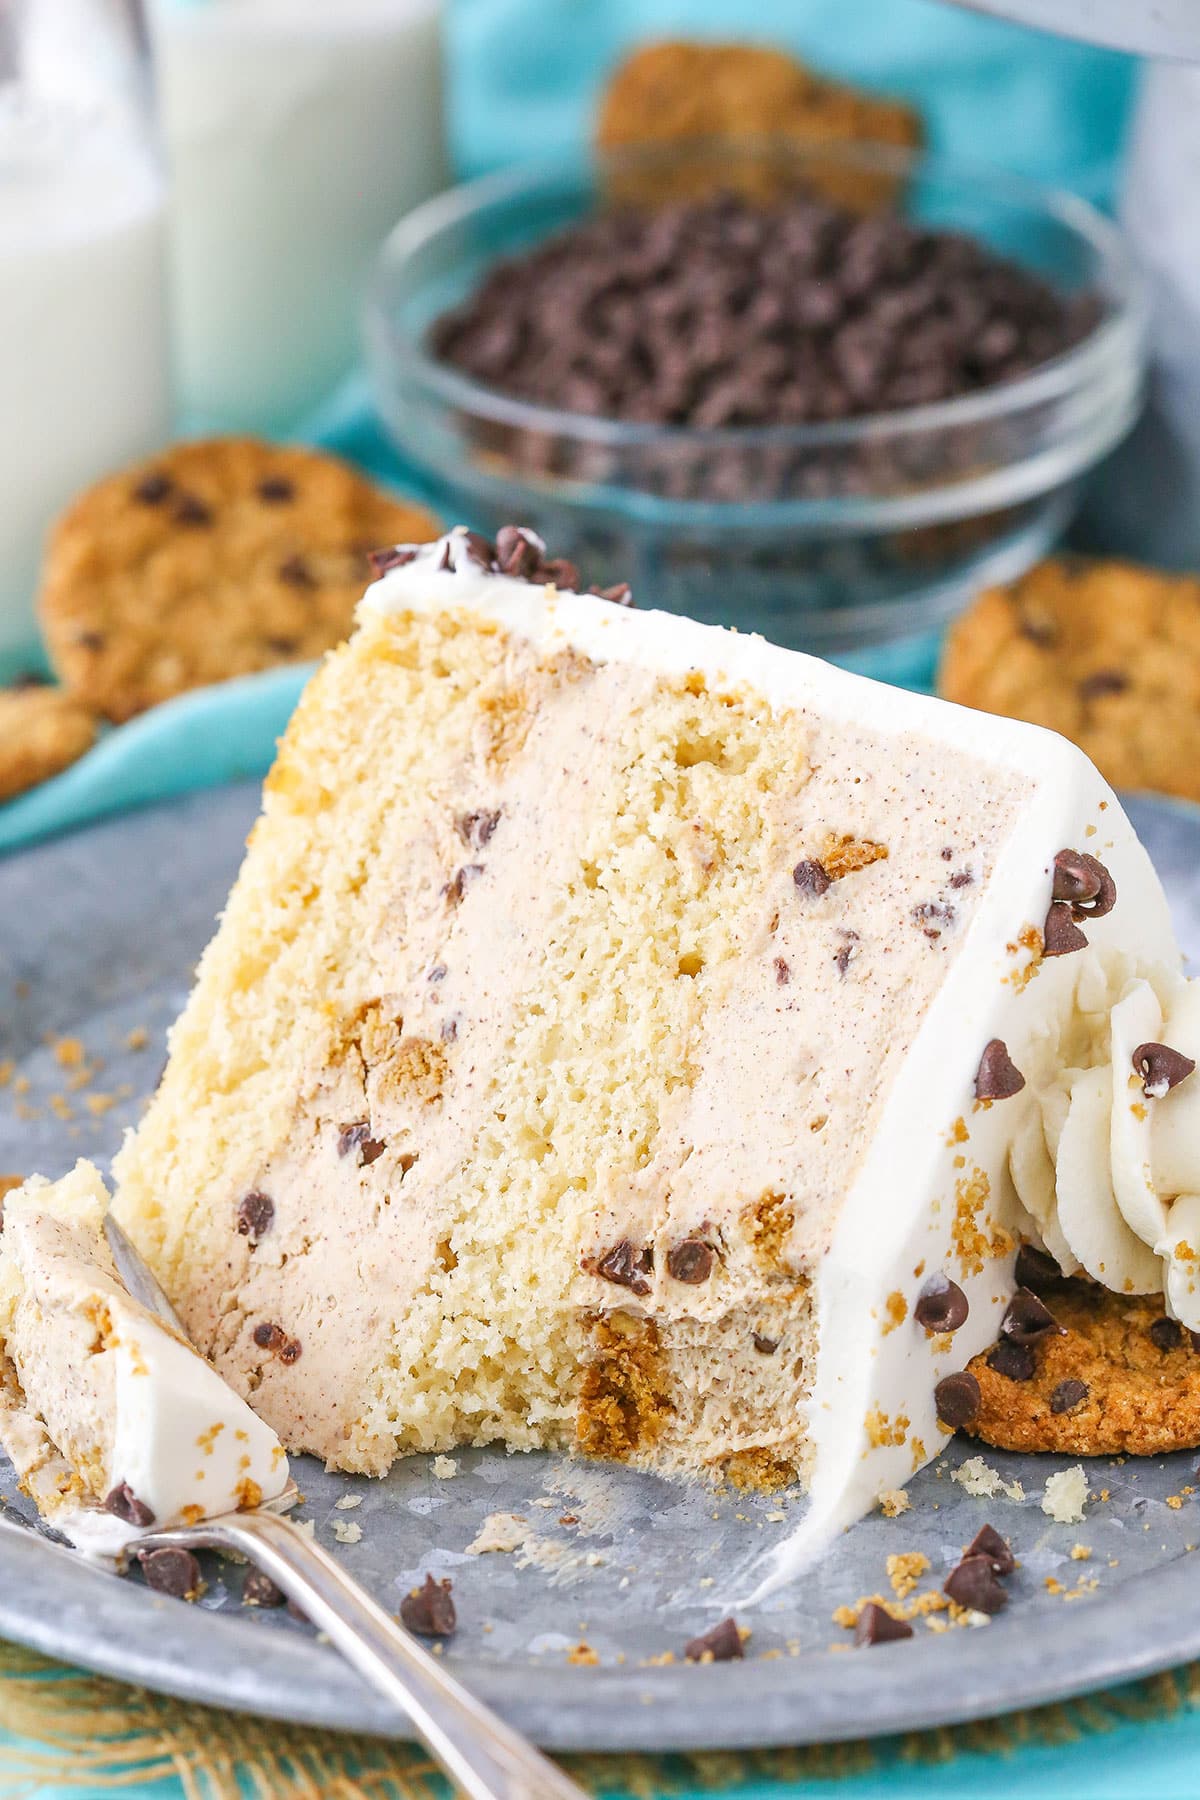 Slice of ice cream cake with oatmeal cookies.